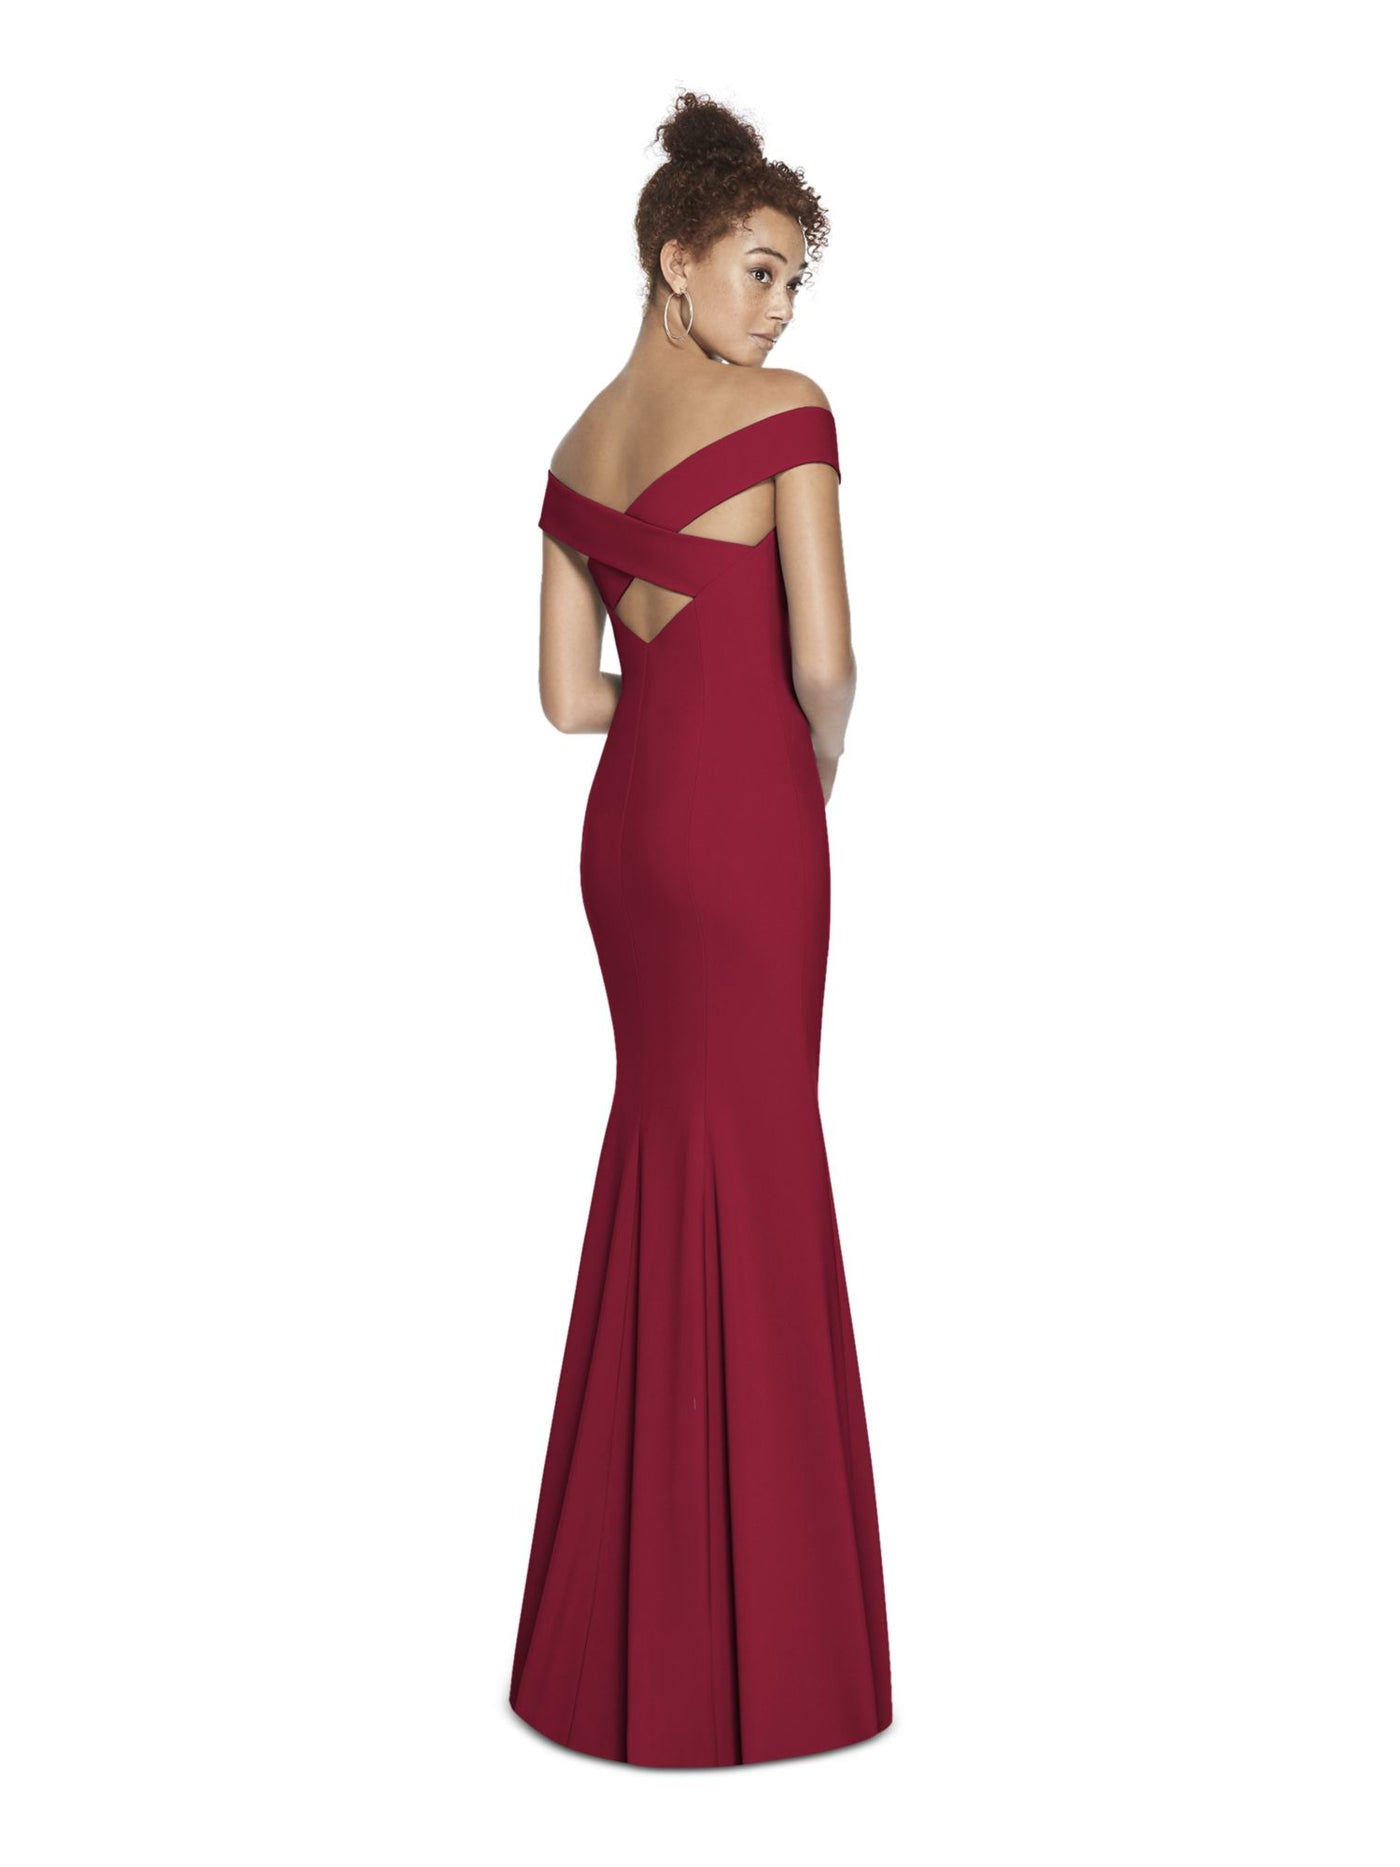 DESSY COLLECTION Womens Red Slitted Lined Criss Cross Back Short Sleeve Off Shoulder Full-Length Evening Gown Dress 2